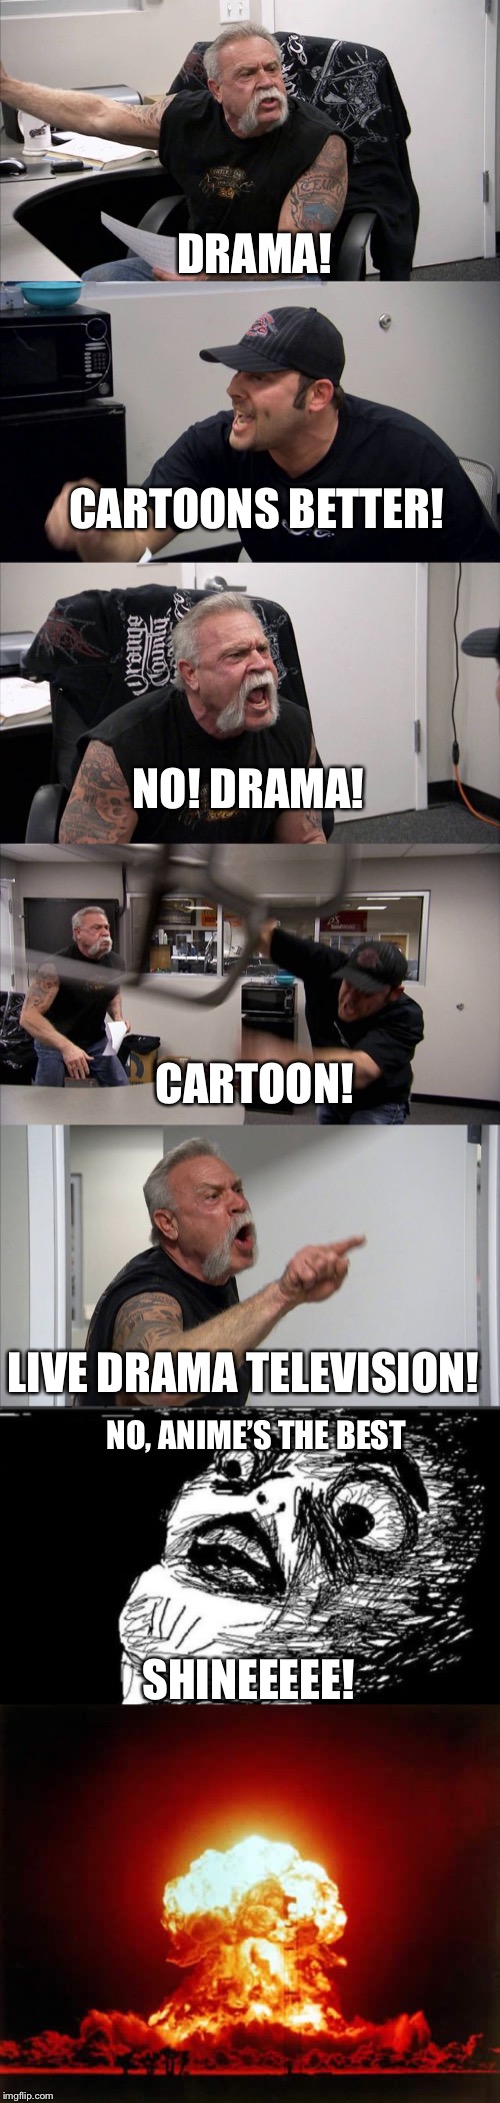 DRAMA! CARTOONS BETTER! NO! DRAMA! CARTOON! LIVE DRAMA TELEVISION! NO, ANIME’S THE BEST; SHINEEEEE! | image tagged in memes,gasp rage face,nuclear explosion,american chopper argument | made w/ Imgflip meme maker